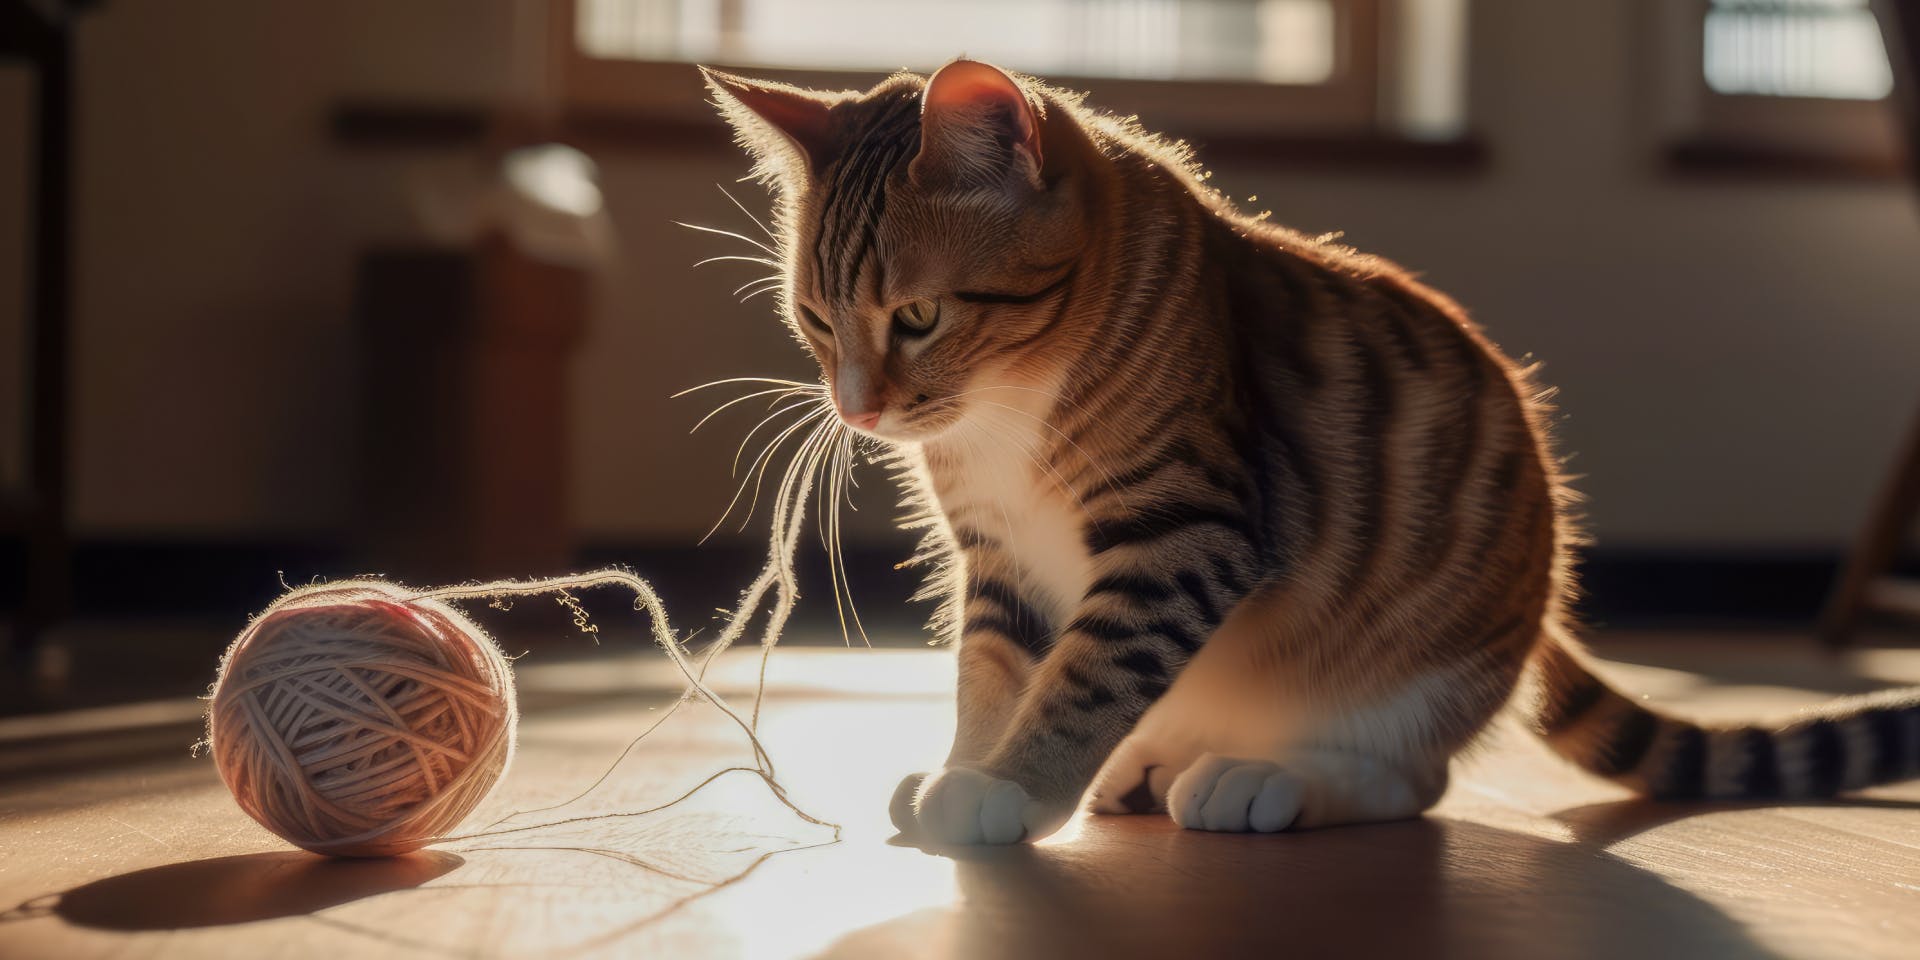 A cat playing with a ball of string.